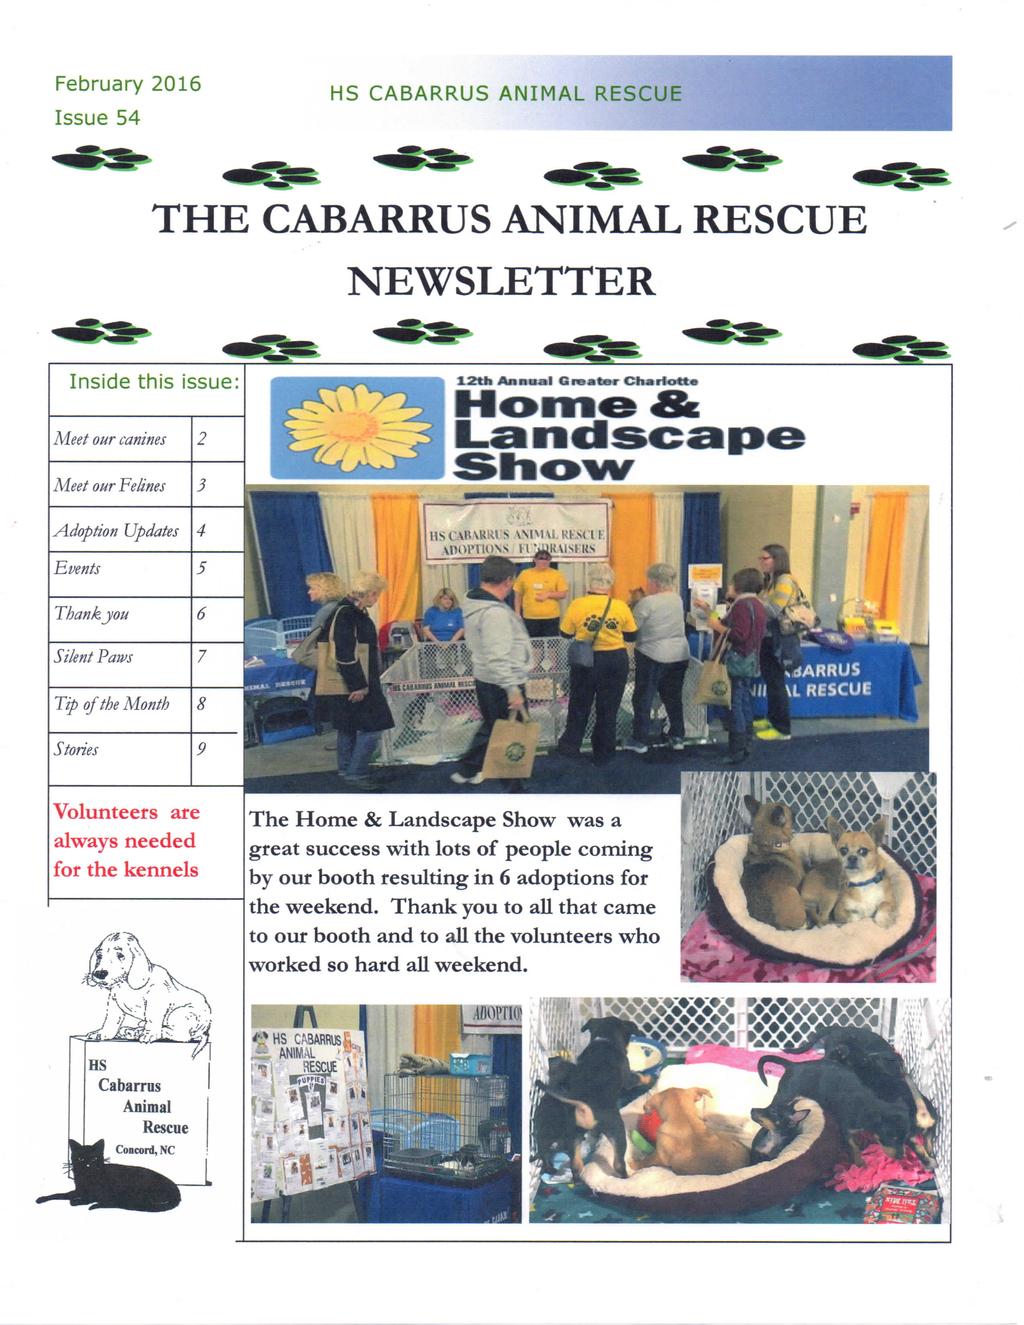 February 2016 Issue 54 HS CABARRUS ANIMAL RESCUE 1 THE CABARRUS ANIMAL RESCUE NEWSLETTER Inside this issue: Meet our canines 2 12th AitfitMil Greater Charlott* Home 4Sk Landscape Meet our Felines